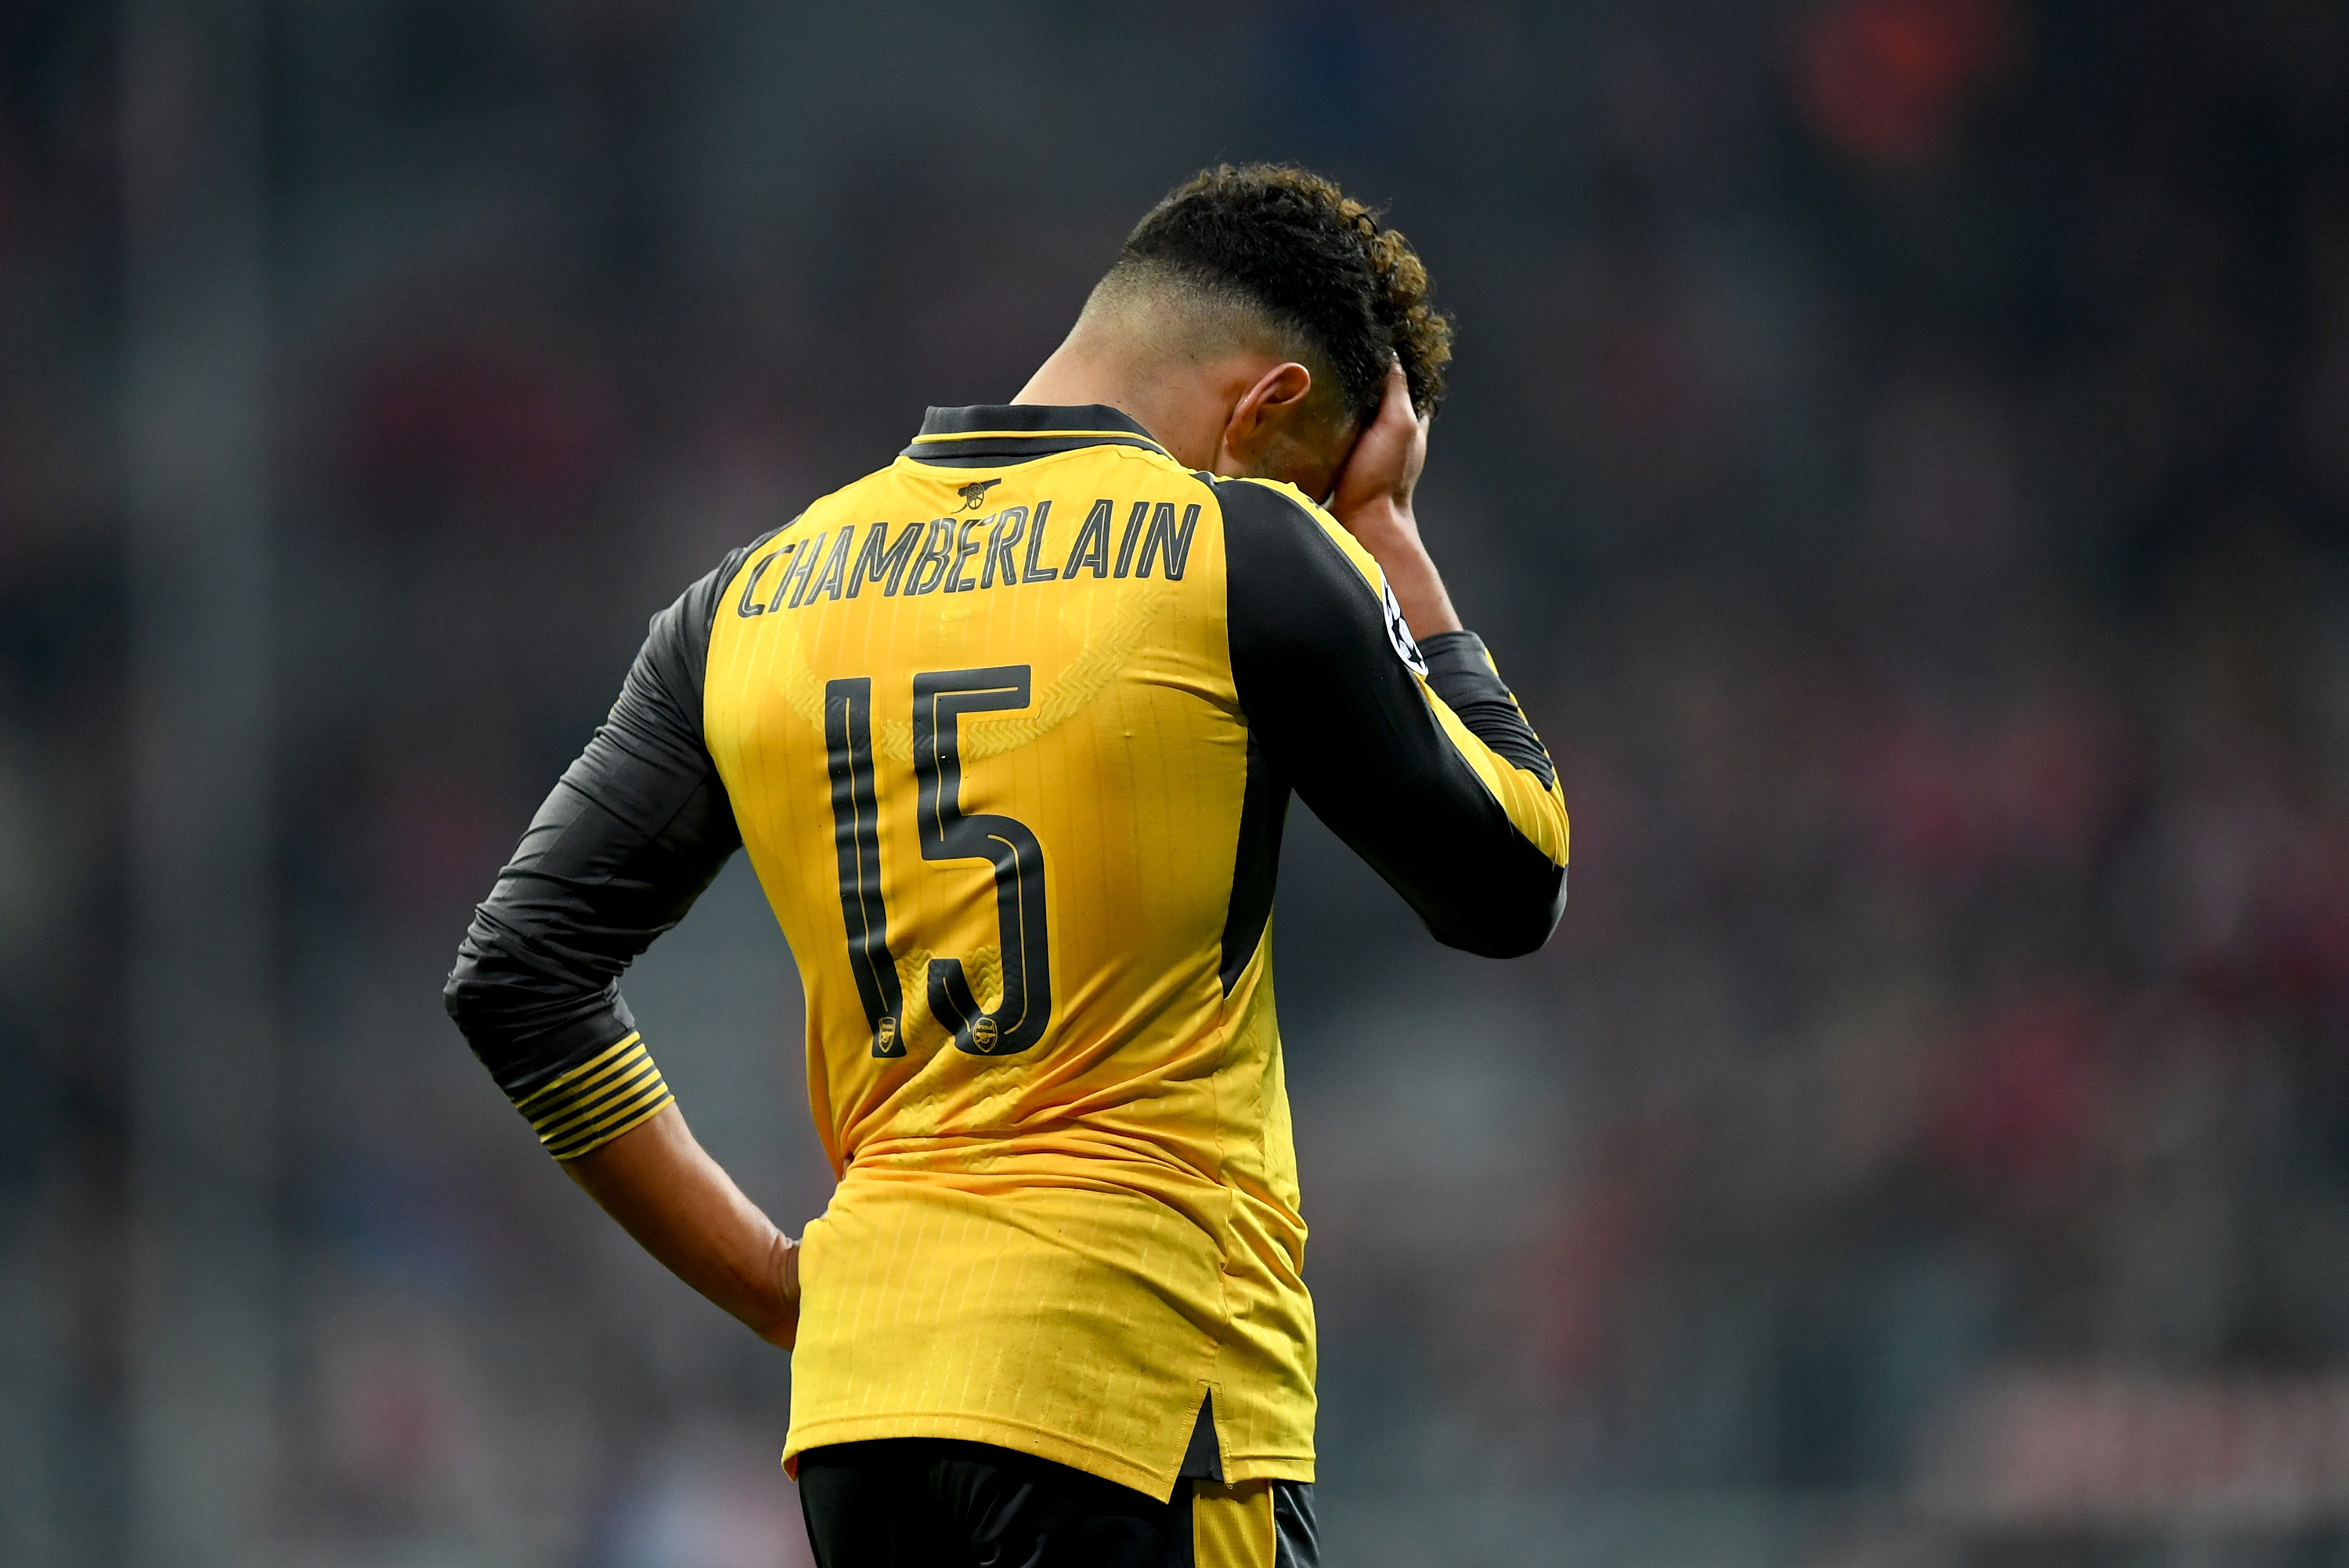 MUNICH, GERMANY - FEBRUARY 15: Alex Oxlade Chamberlain of Arsenal looks dejected after the UEFA Champions League Round of 16 first leg match between FC Bayern Muenchen and Arsenal FC at Allianz Arena on February 15, 2017 in Munich, Germany.  (Photo by Matthias Hangst/Bongarts/Getty Images)